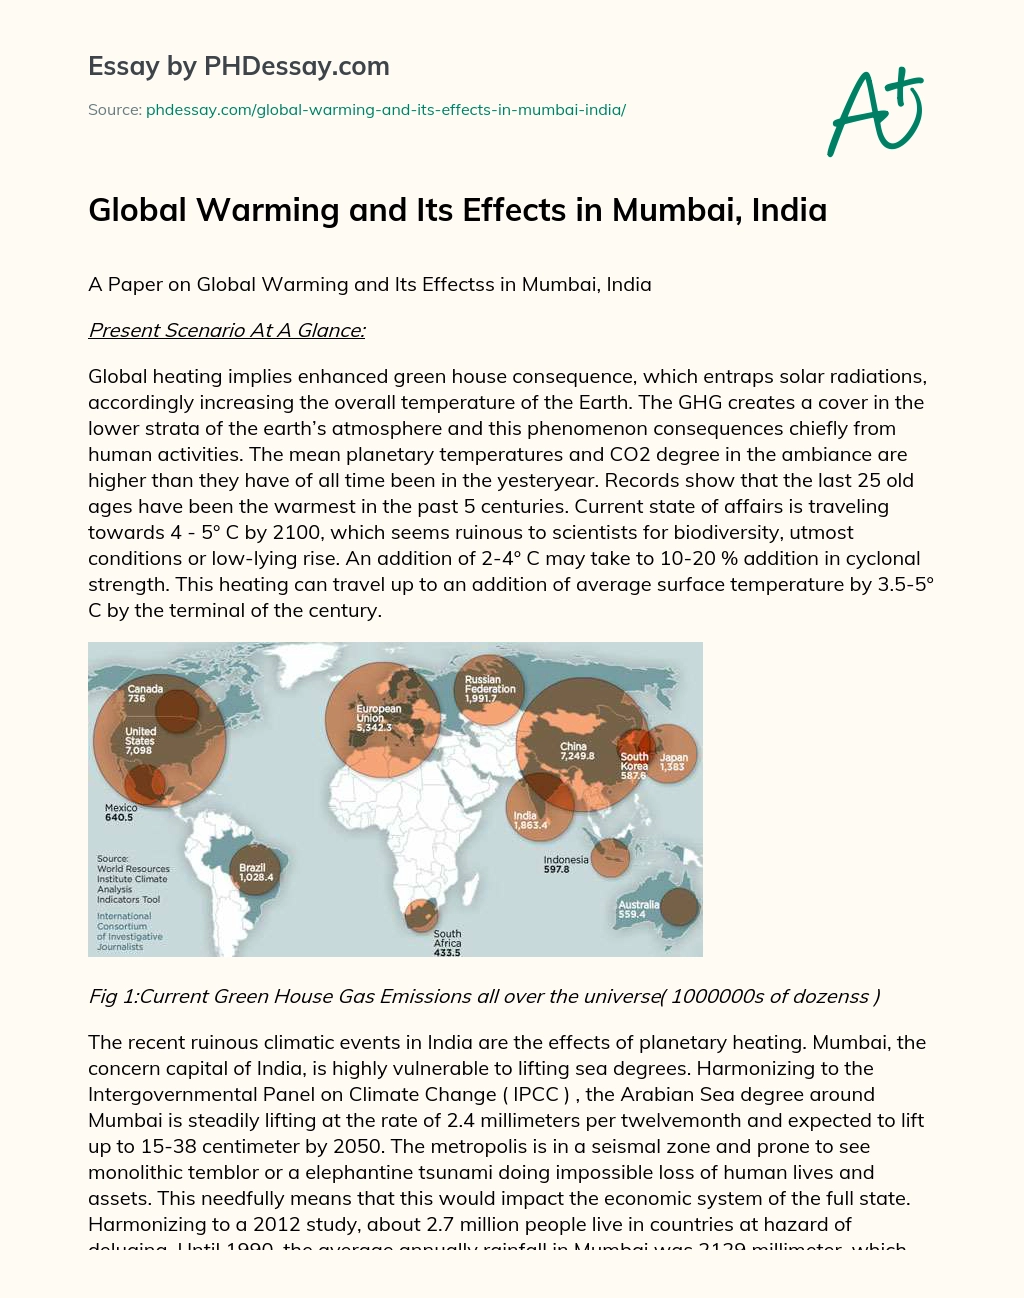 Global Warming and Its Effects in Mumbai, India essay